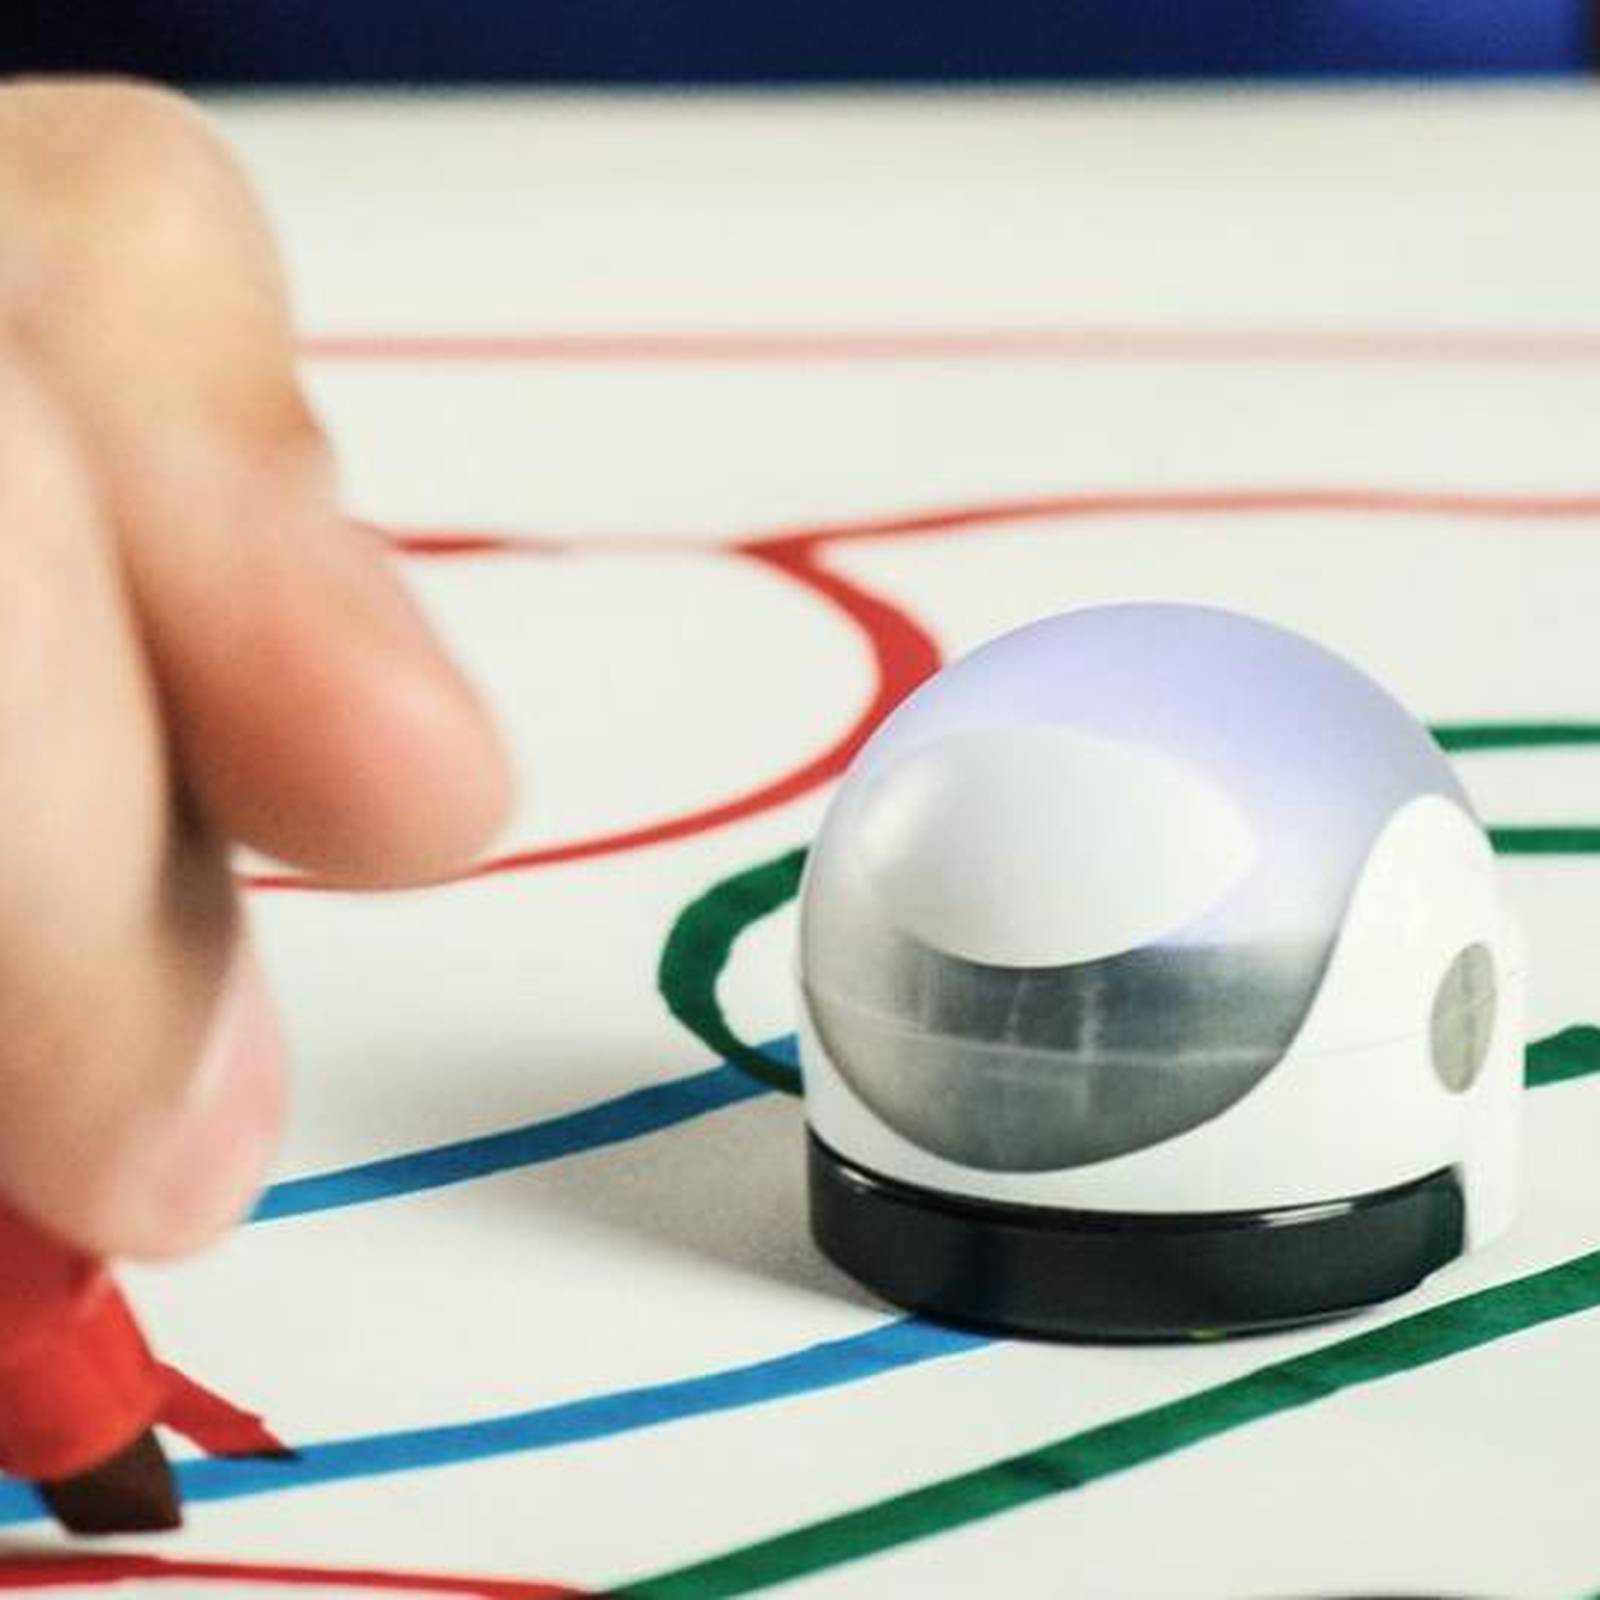 Our Ozobots Review and Educational Tips - Tutorial Australia